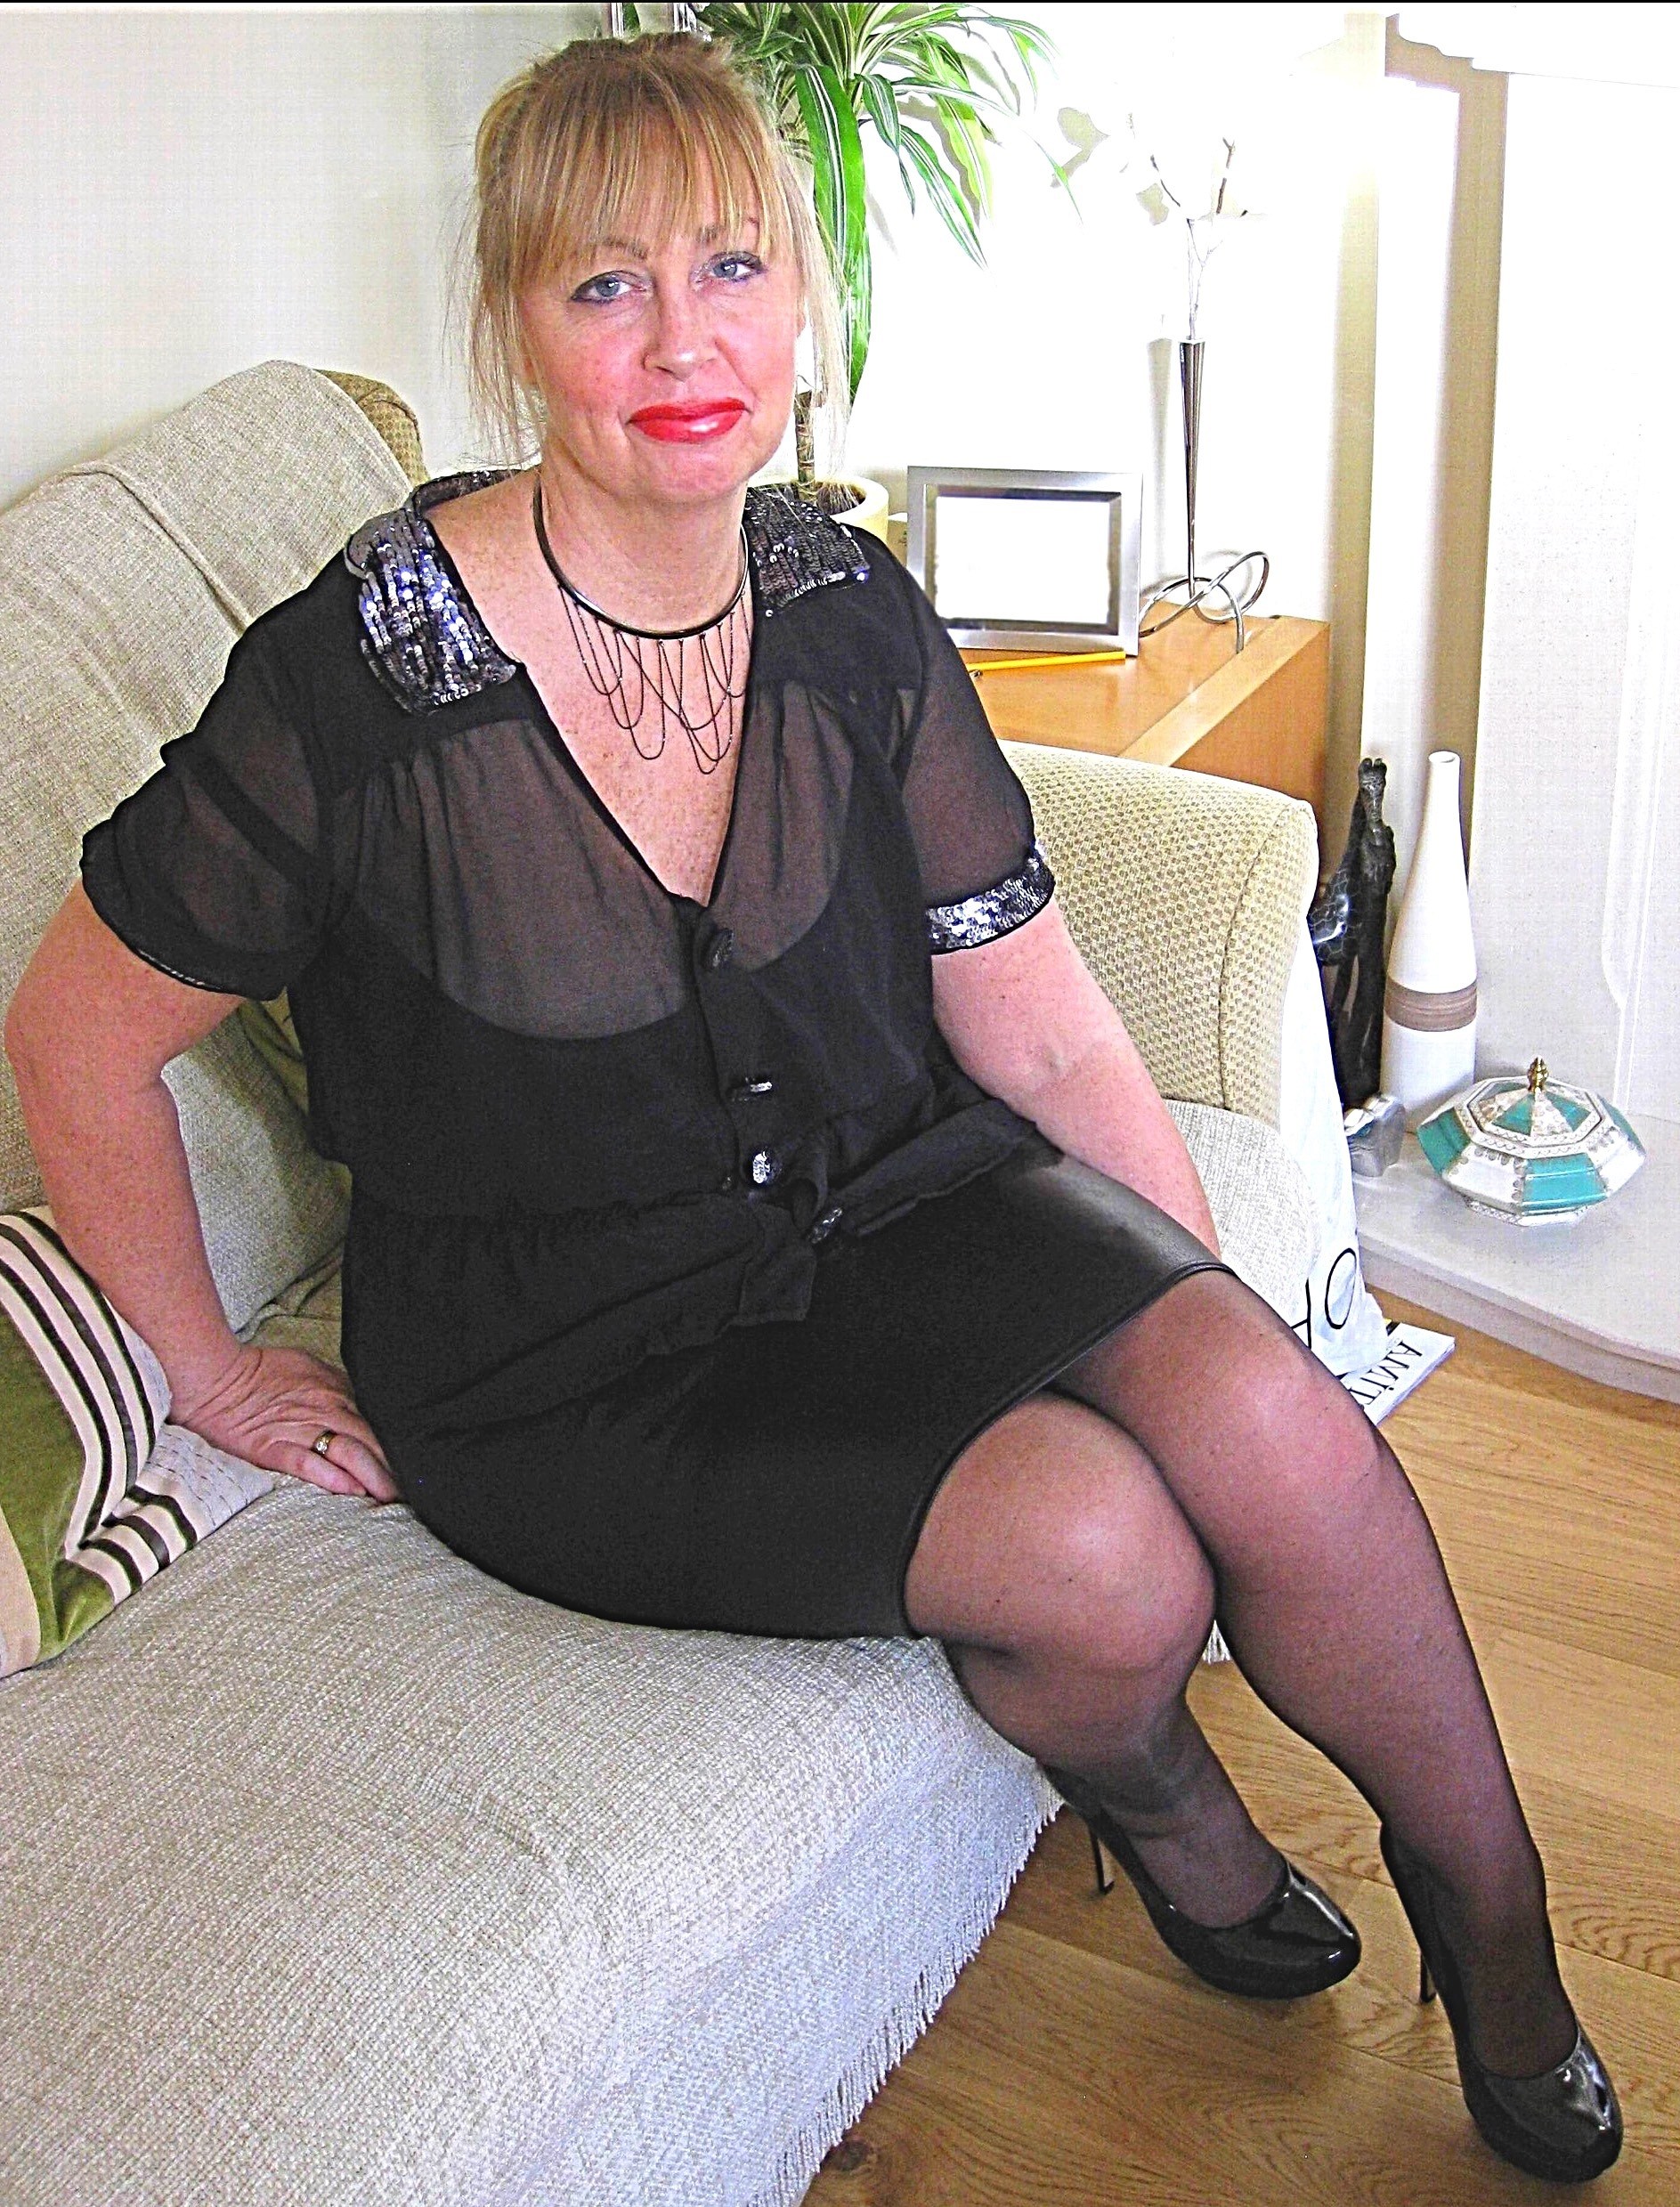 Office Skirts And Stockings - Prostitutes Over 50 Years Old in Stockings and Skirt (63 photos) - porn  photo